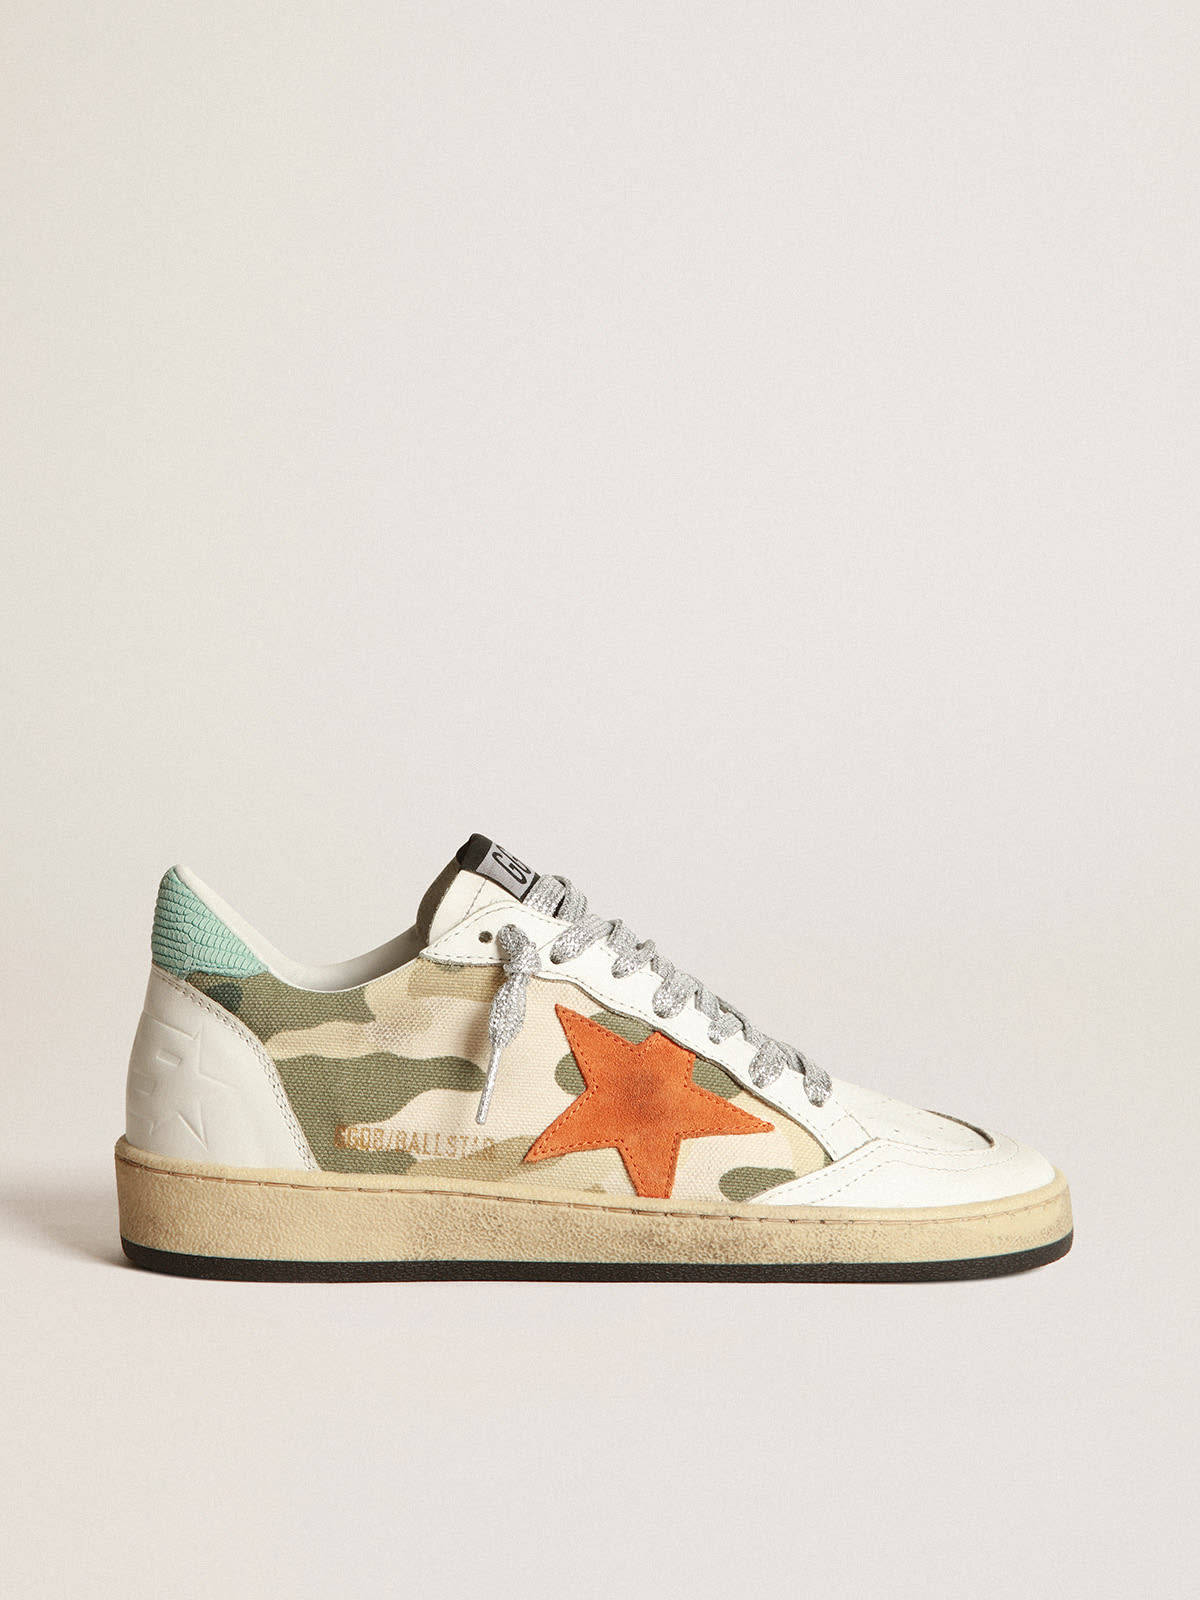 Golden Goose - Ball Star sneakers in camouflage canvas with orange suede star and aquamarine lizard-print nubuck heel tab in 